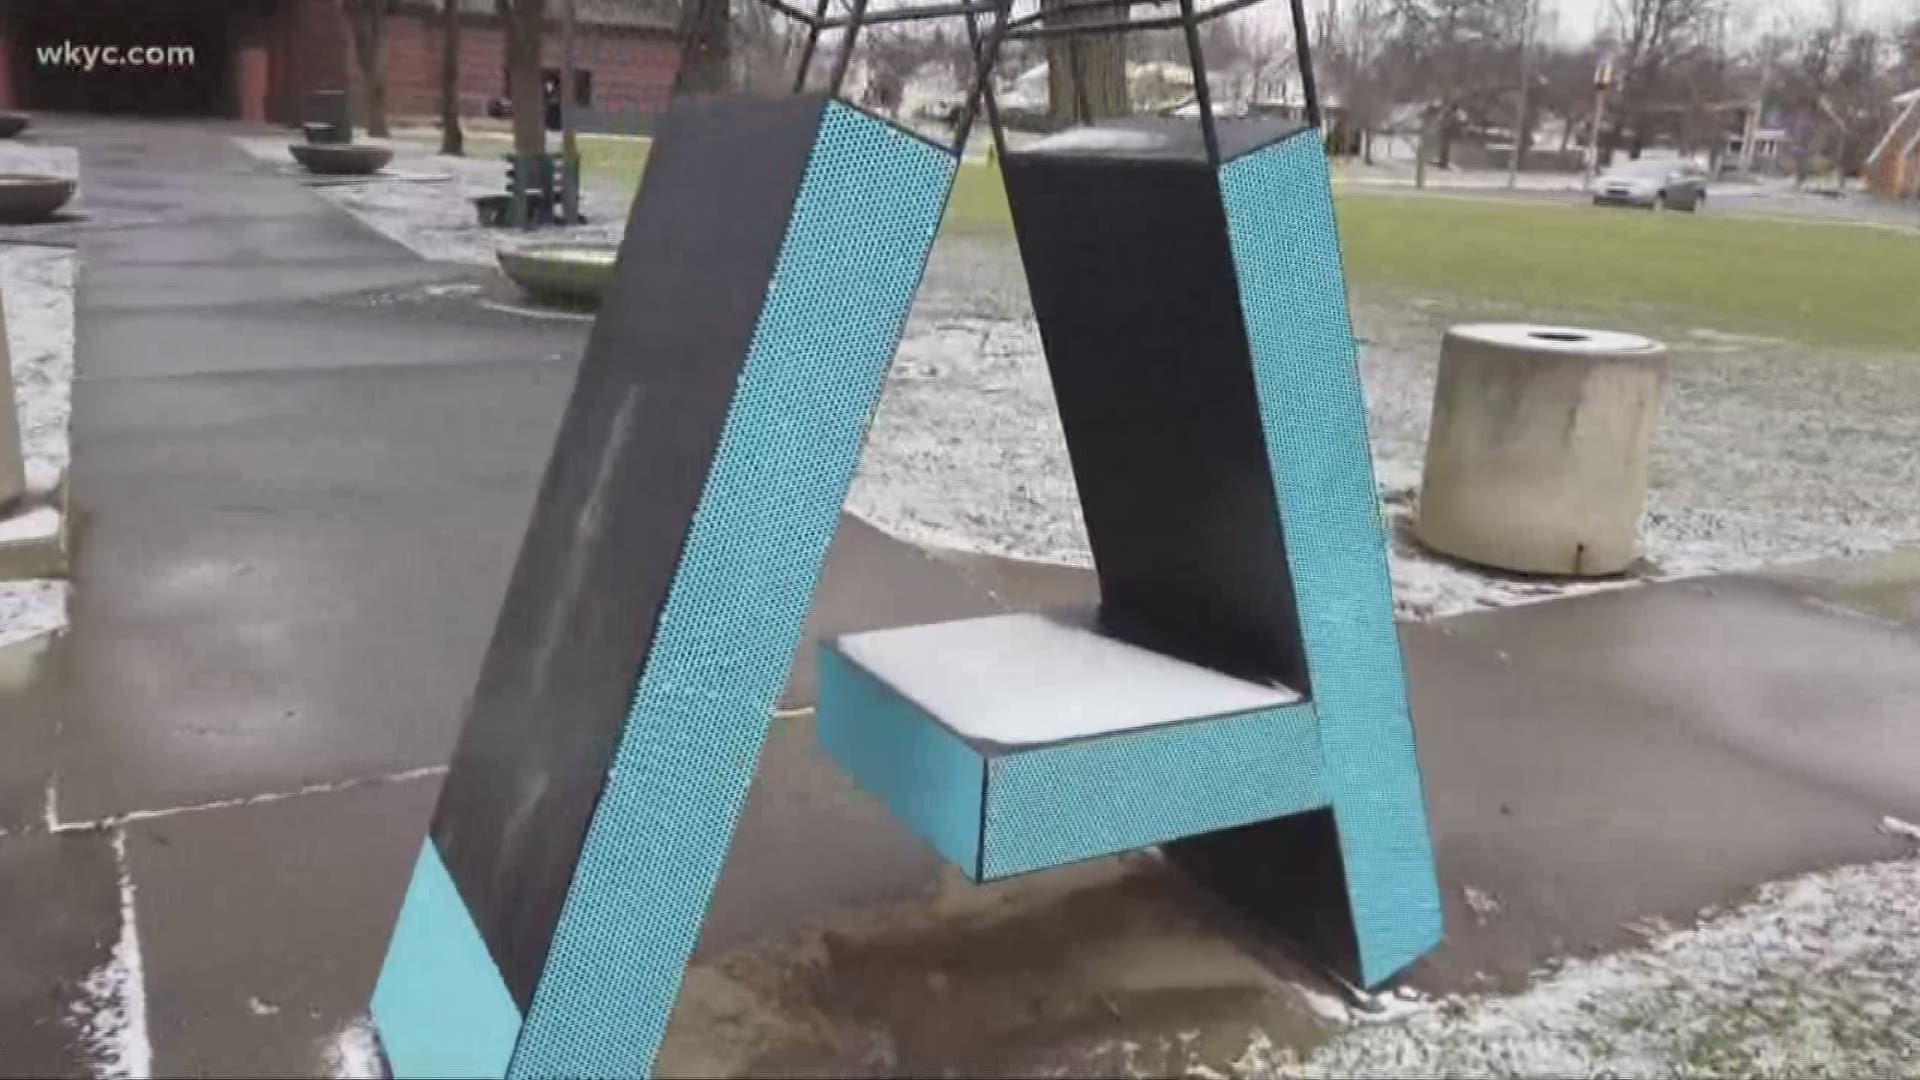 The benches will be set up in four different locations across the city to encourage people to explore and discover. Amani Abraham reports.